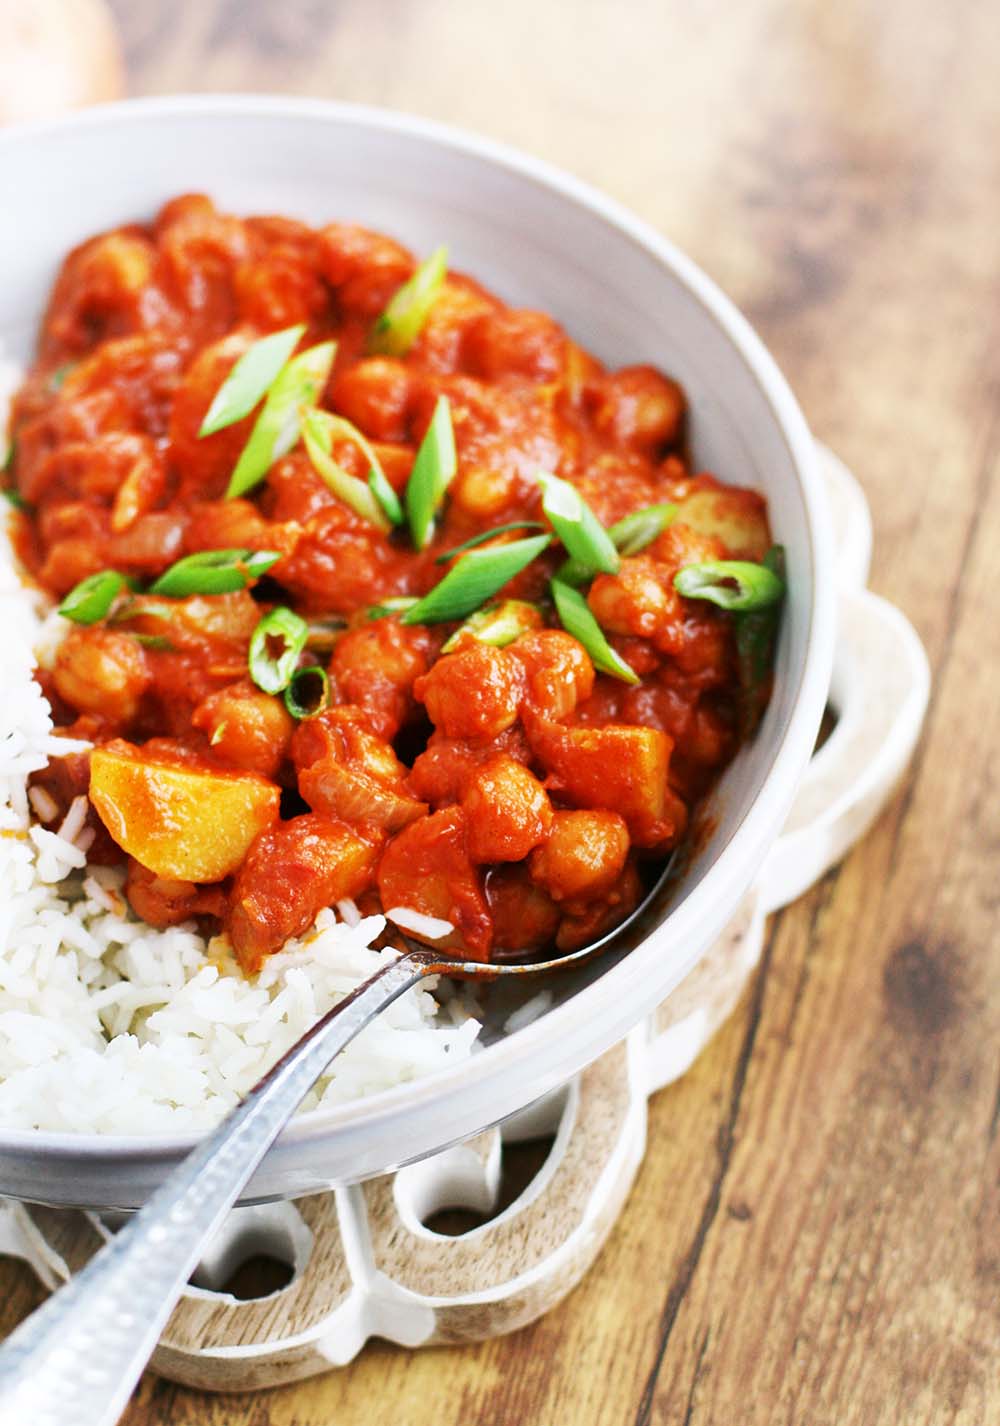 Chickpea and tomato curry: An incredibly cheap recipe made from pantry staples. Less than $5!